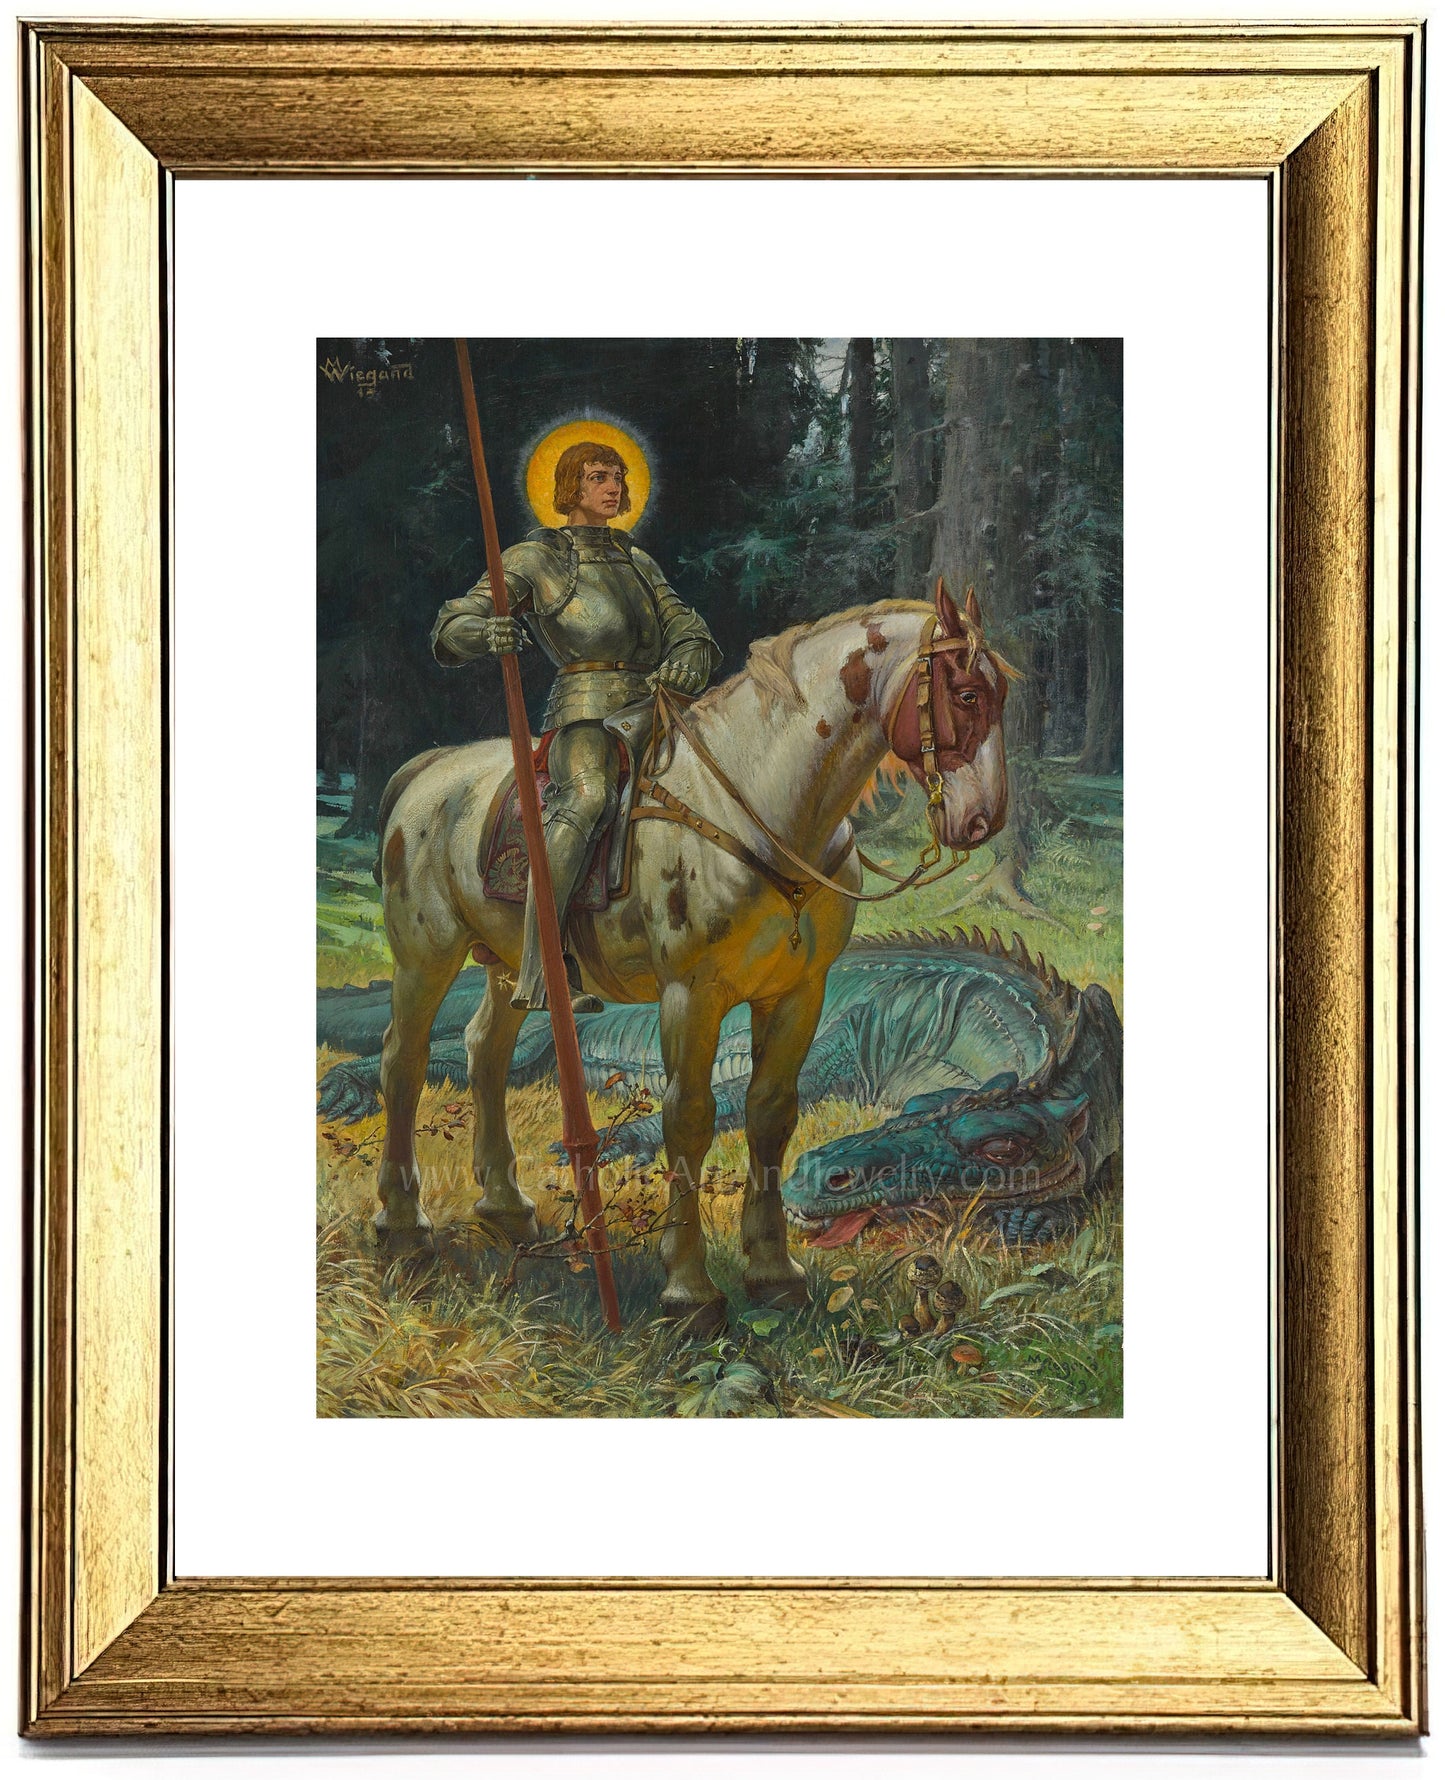 St. George in Front of the Slain Dragon – by Martin Wiegand – 4 Sizes – Catholic Art Print